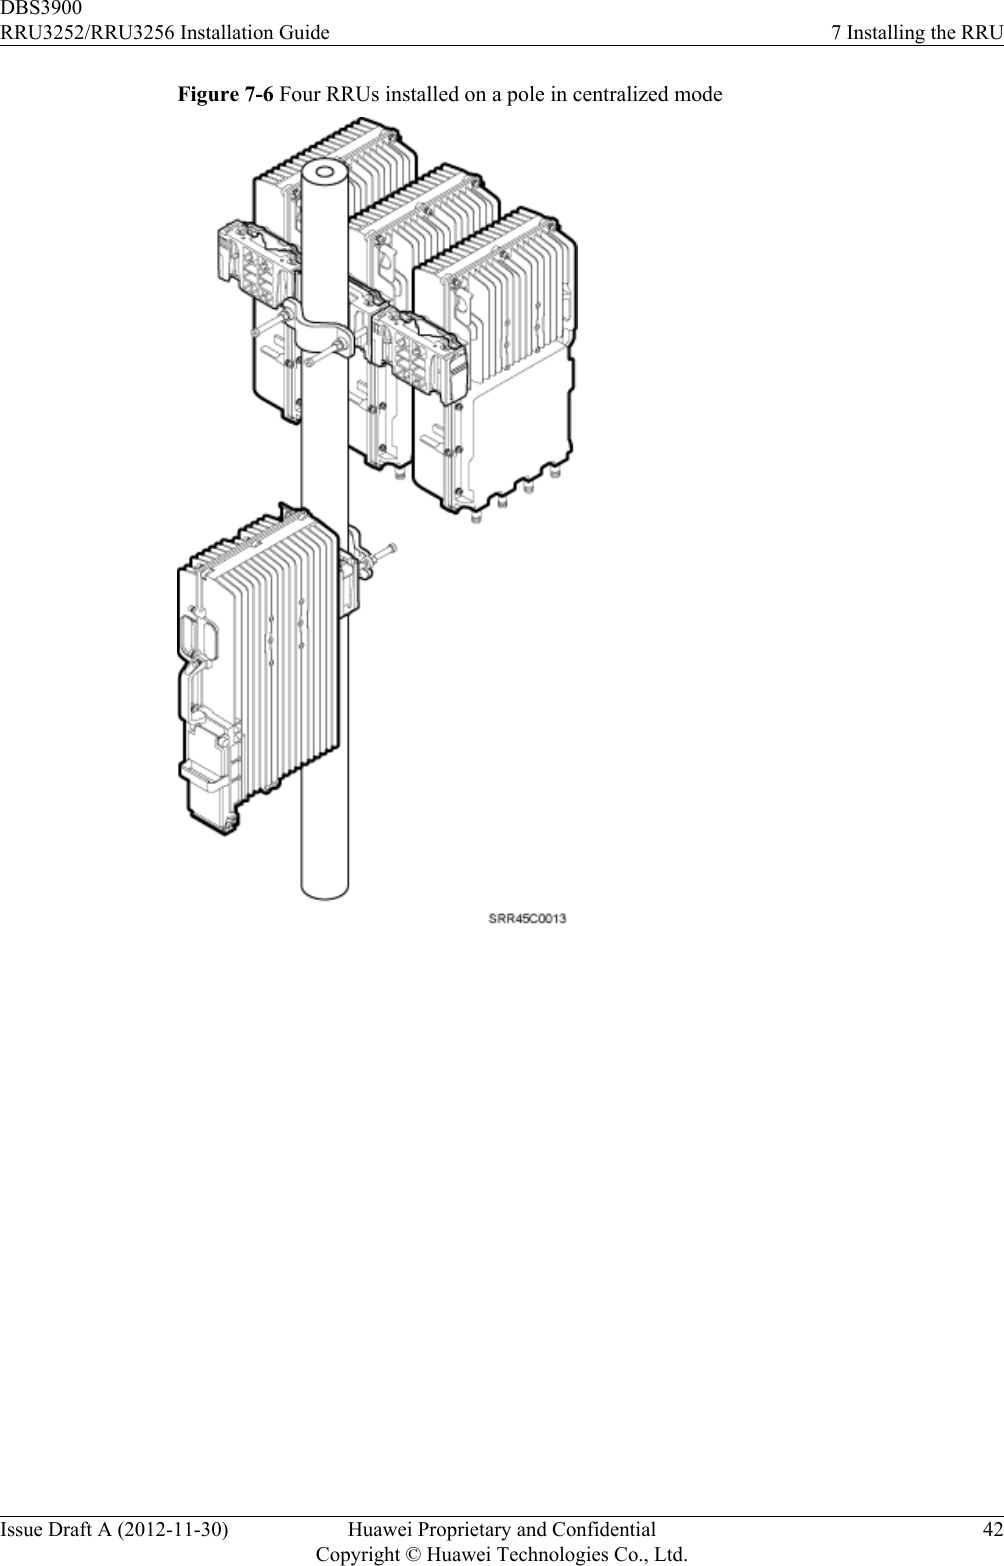 Figure 7-6 Four RRUs installed on a pole in centralized mode DBS3900RRU3252/RRU3256 Installation Guide 7 Installing the RRUIssue Draft A (2012-11-30) Huawei Proprietary and ConfidentialCopyright © Huawei Technologies Co., Ltd.42